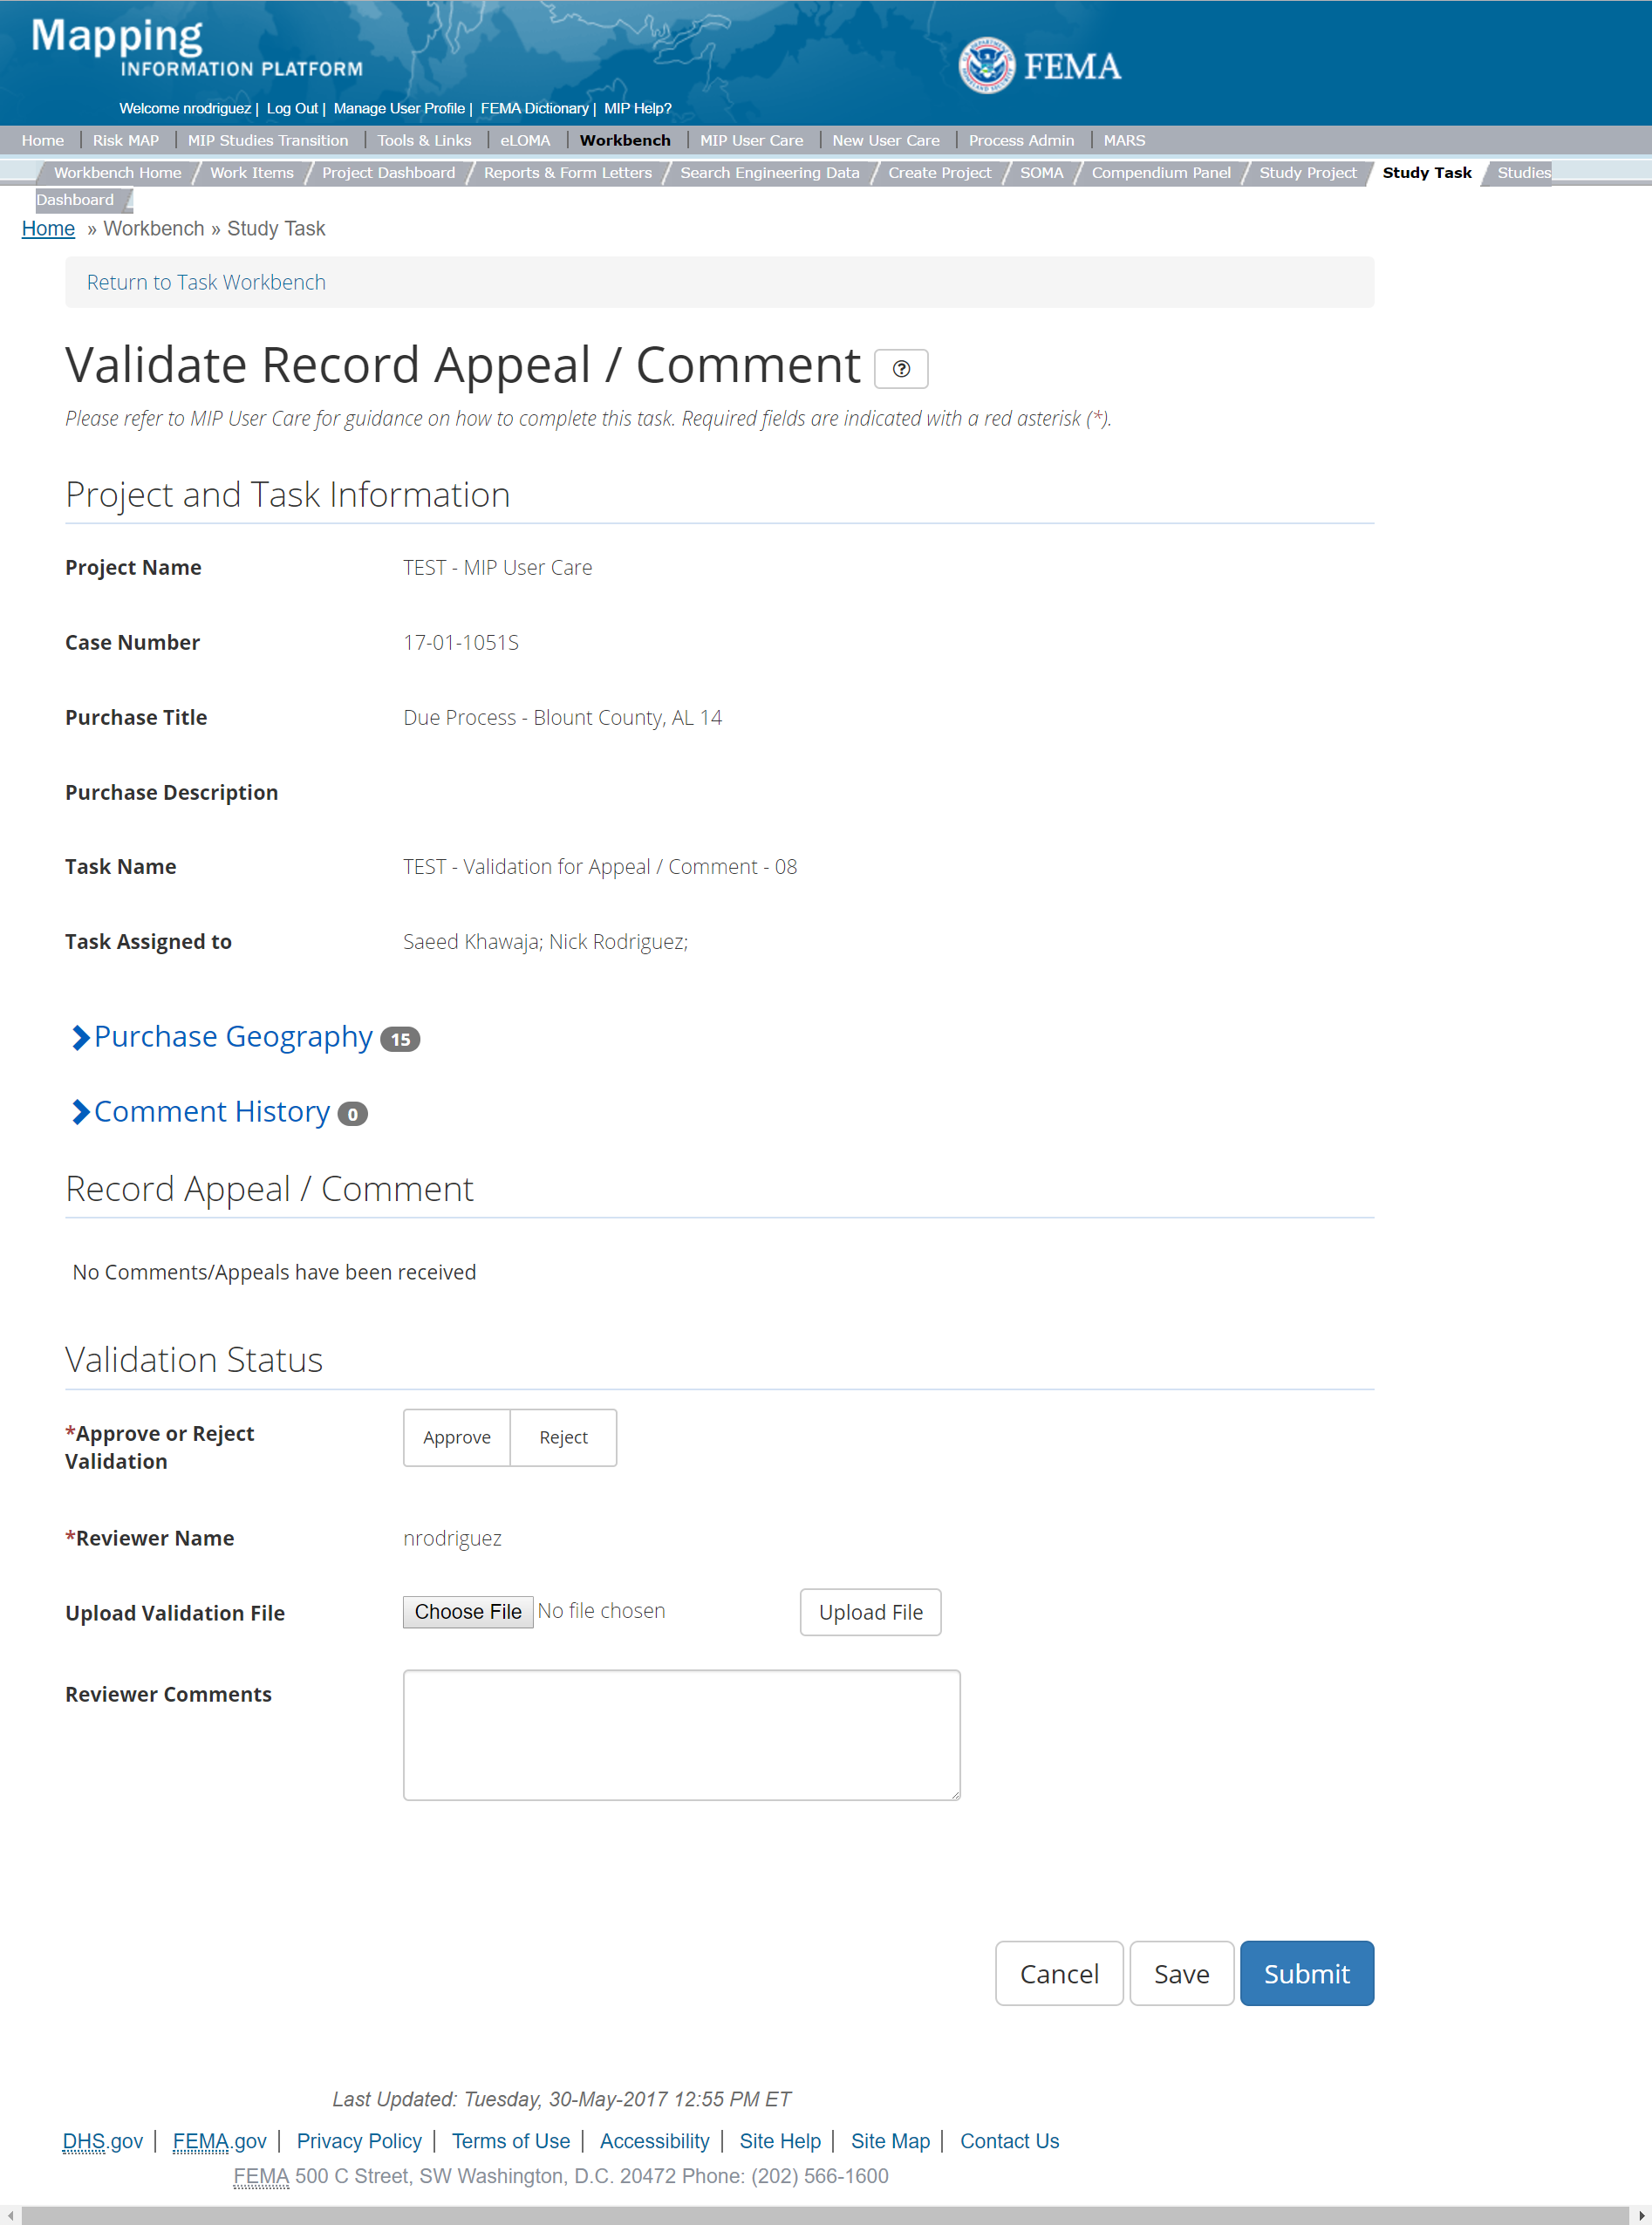 Validate Record Appeal/Comment Task